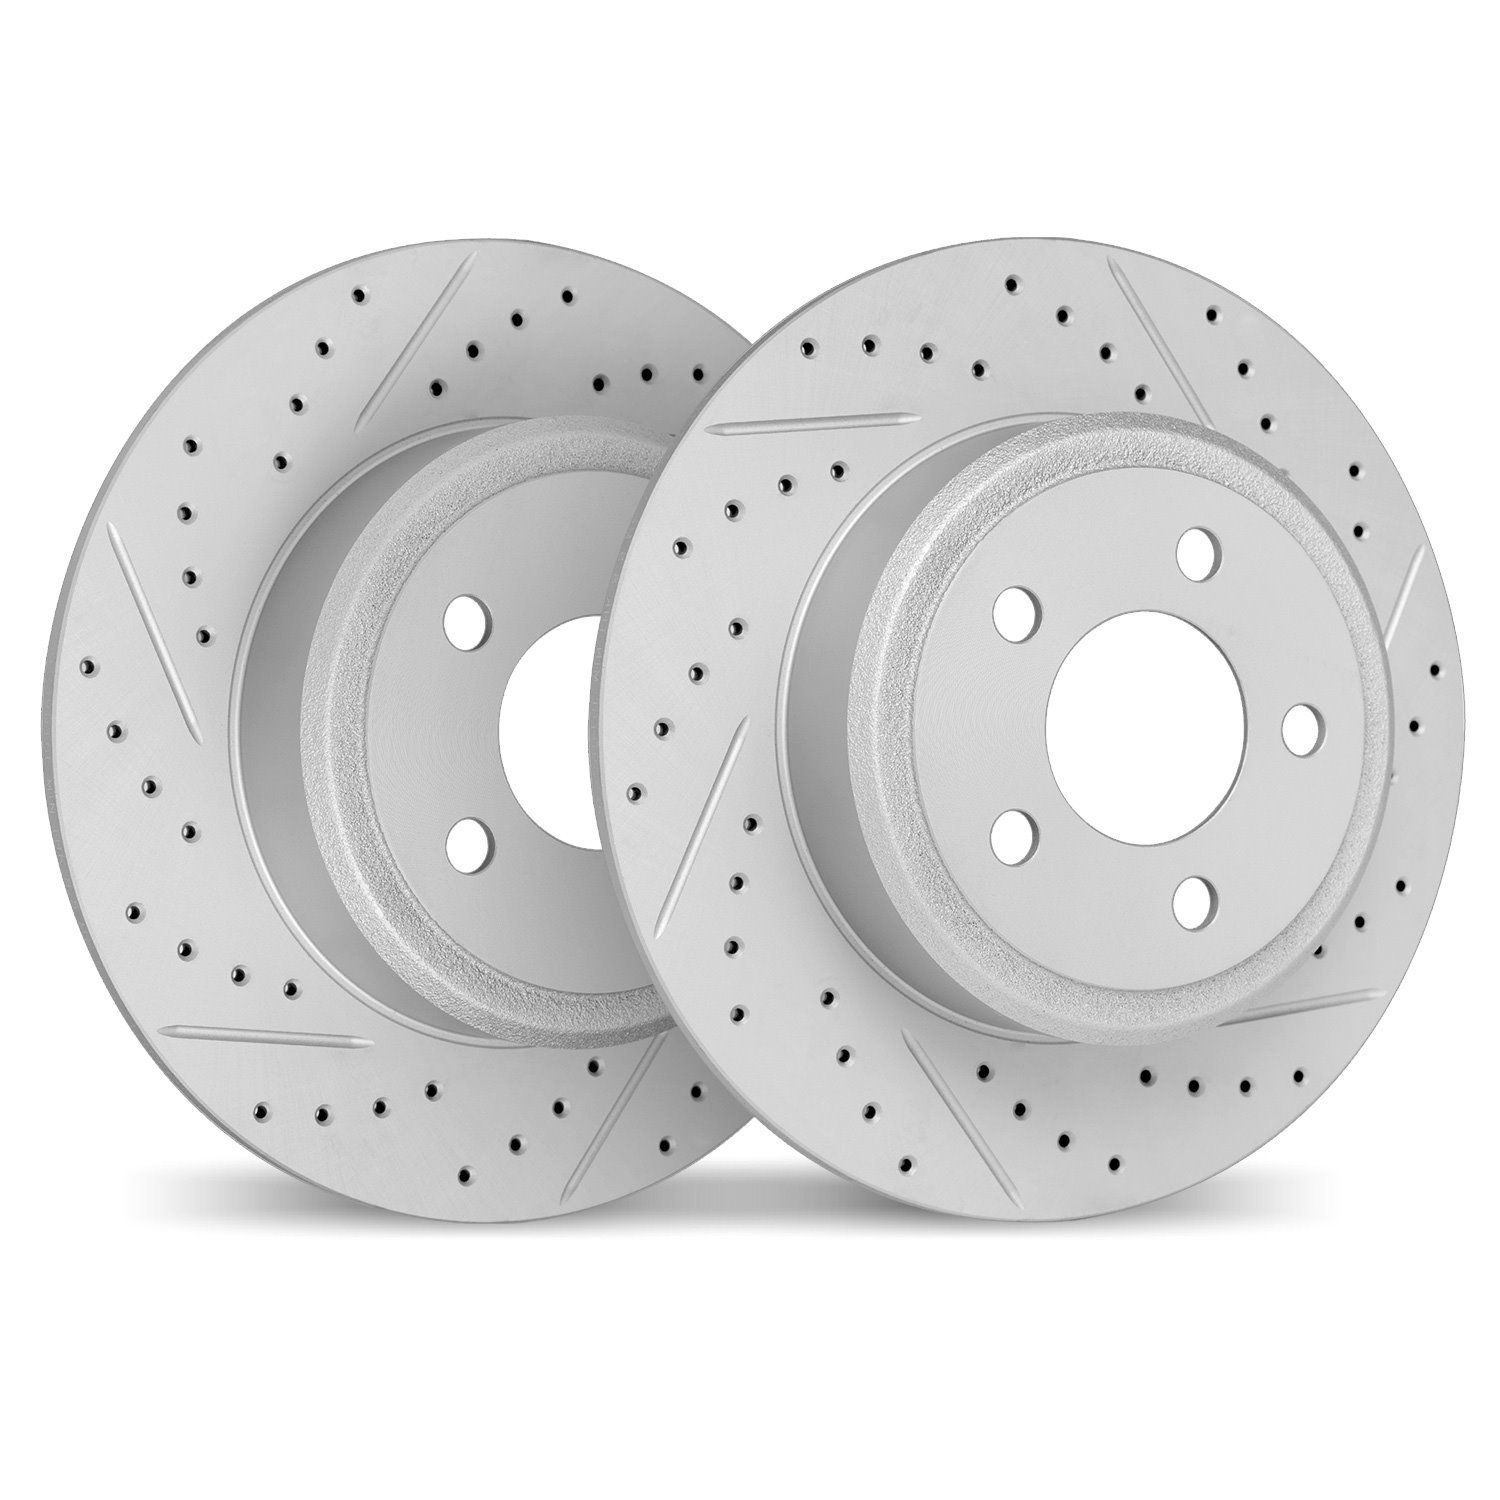 2002-45016 Geoperformance Drilled/Slotted Brake Rotors, 2019-2020 GM, Position: Rear